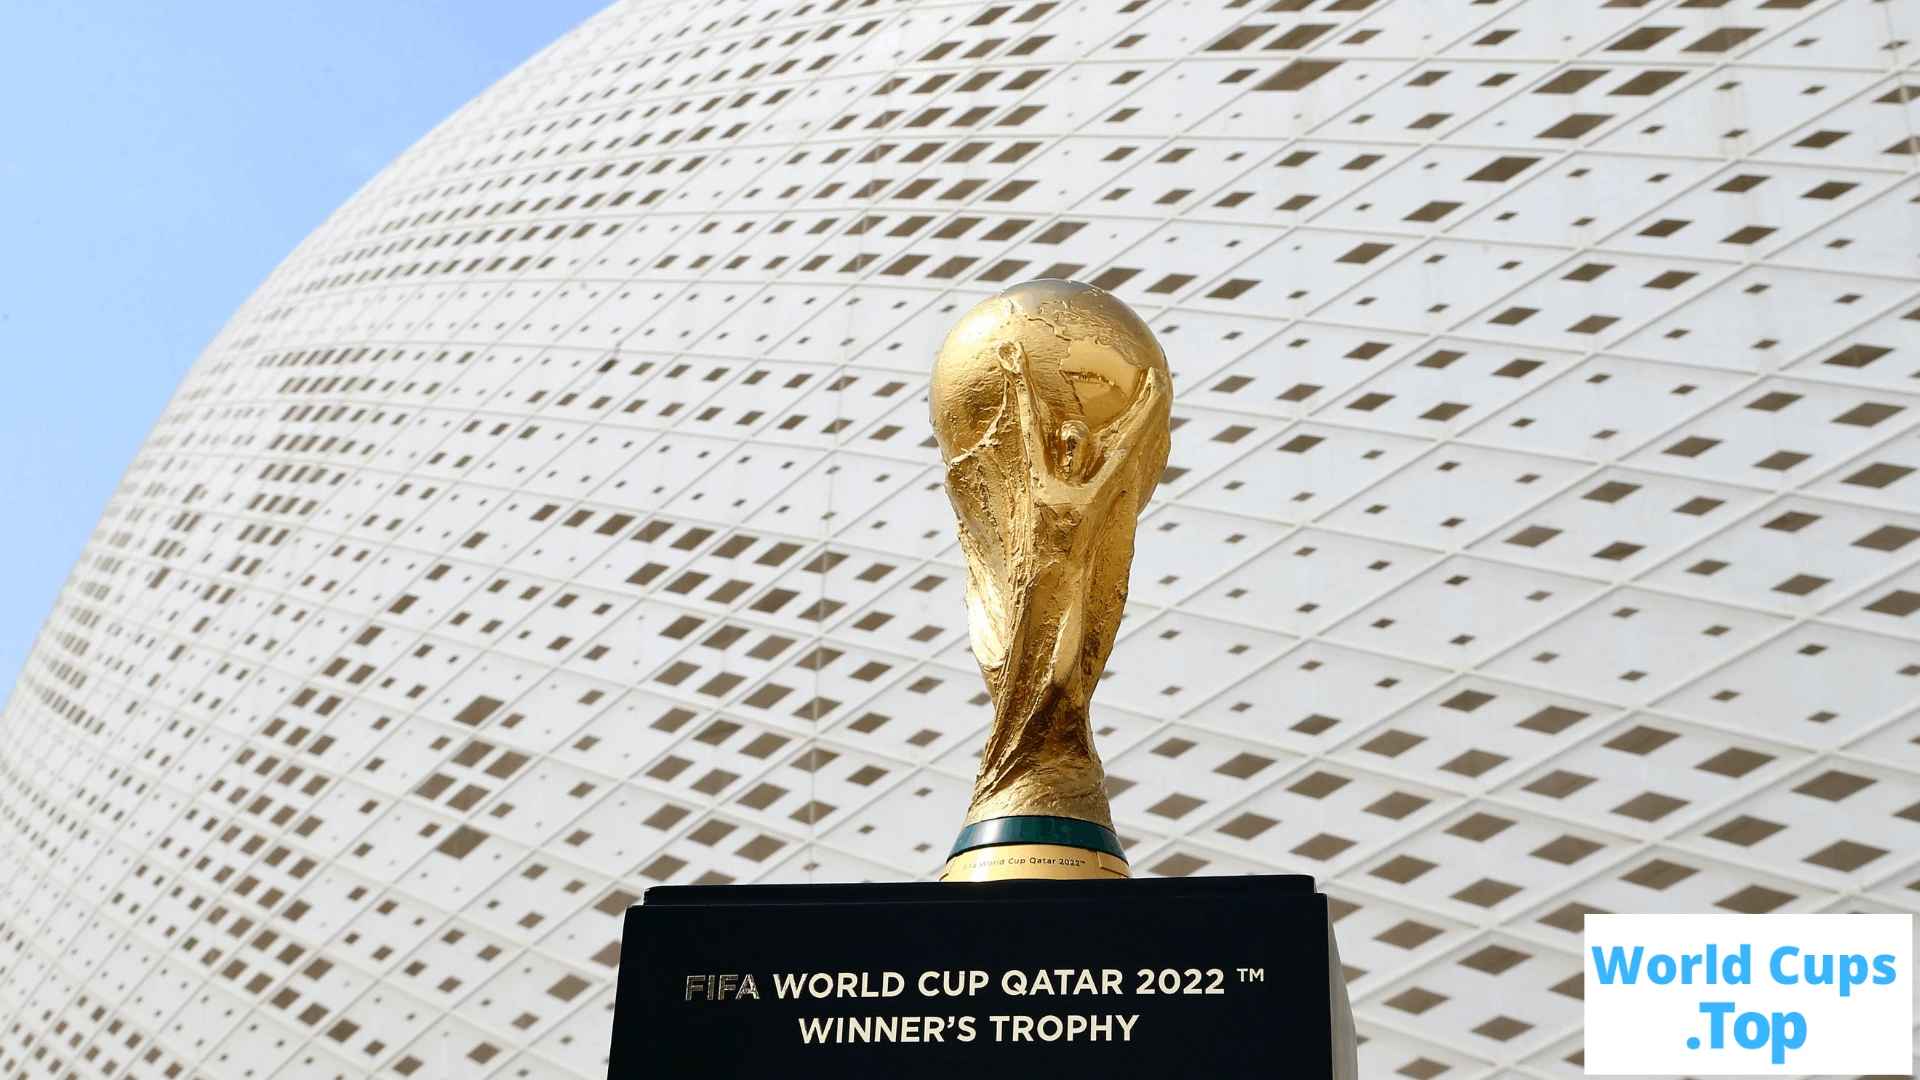 Qatar 2022 Less than a year before the start of the first FIFA World Cupwww.worldcups.top, world cup, world cup qualifiers 2022, world cups,2022 world cup, world cups.top, world cups,worldcups2022,.pn_1